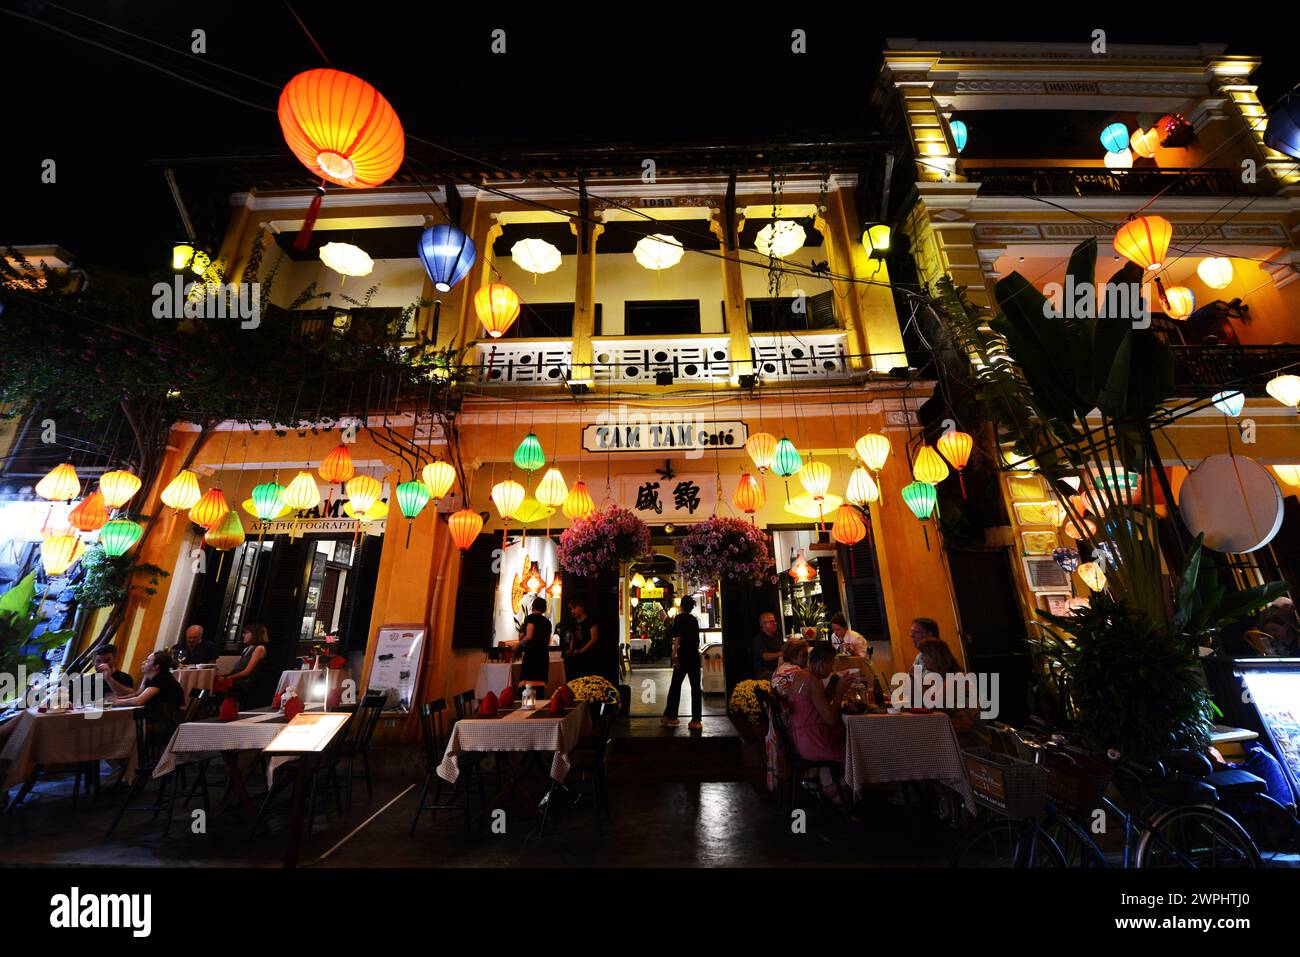 The Tam Tam Cafe & Restaurant at night. Old city of Hoi An, Vietnam. Stock Photo